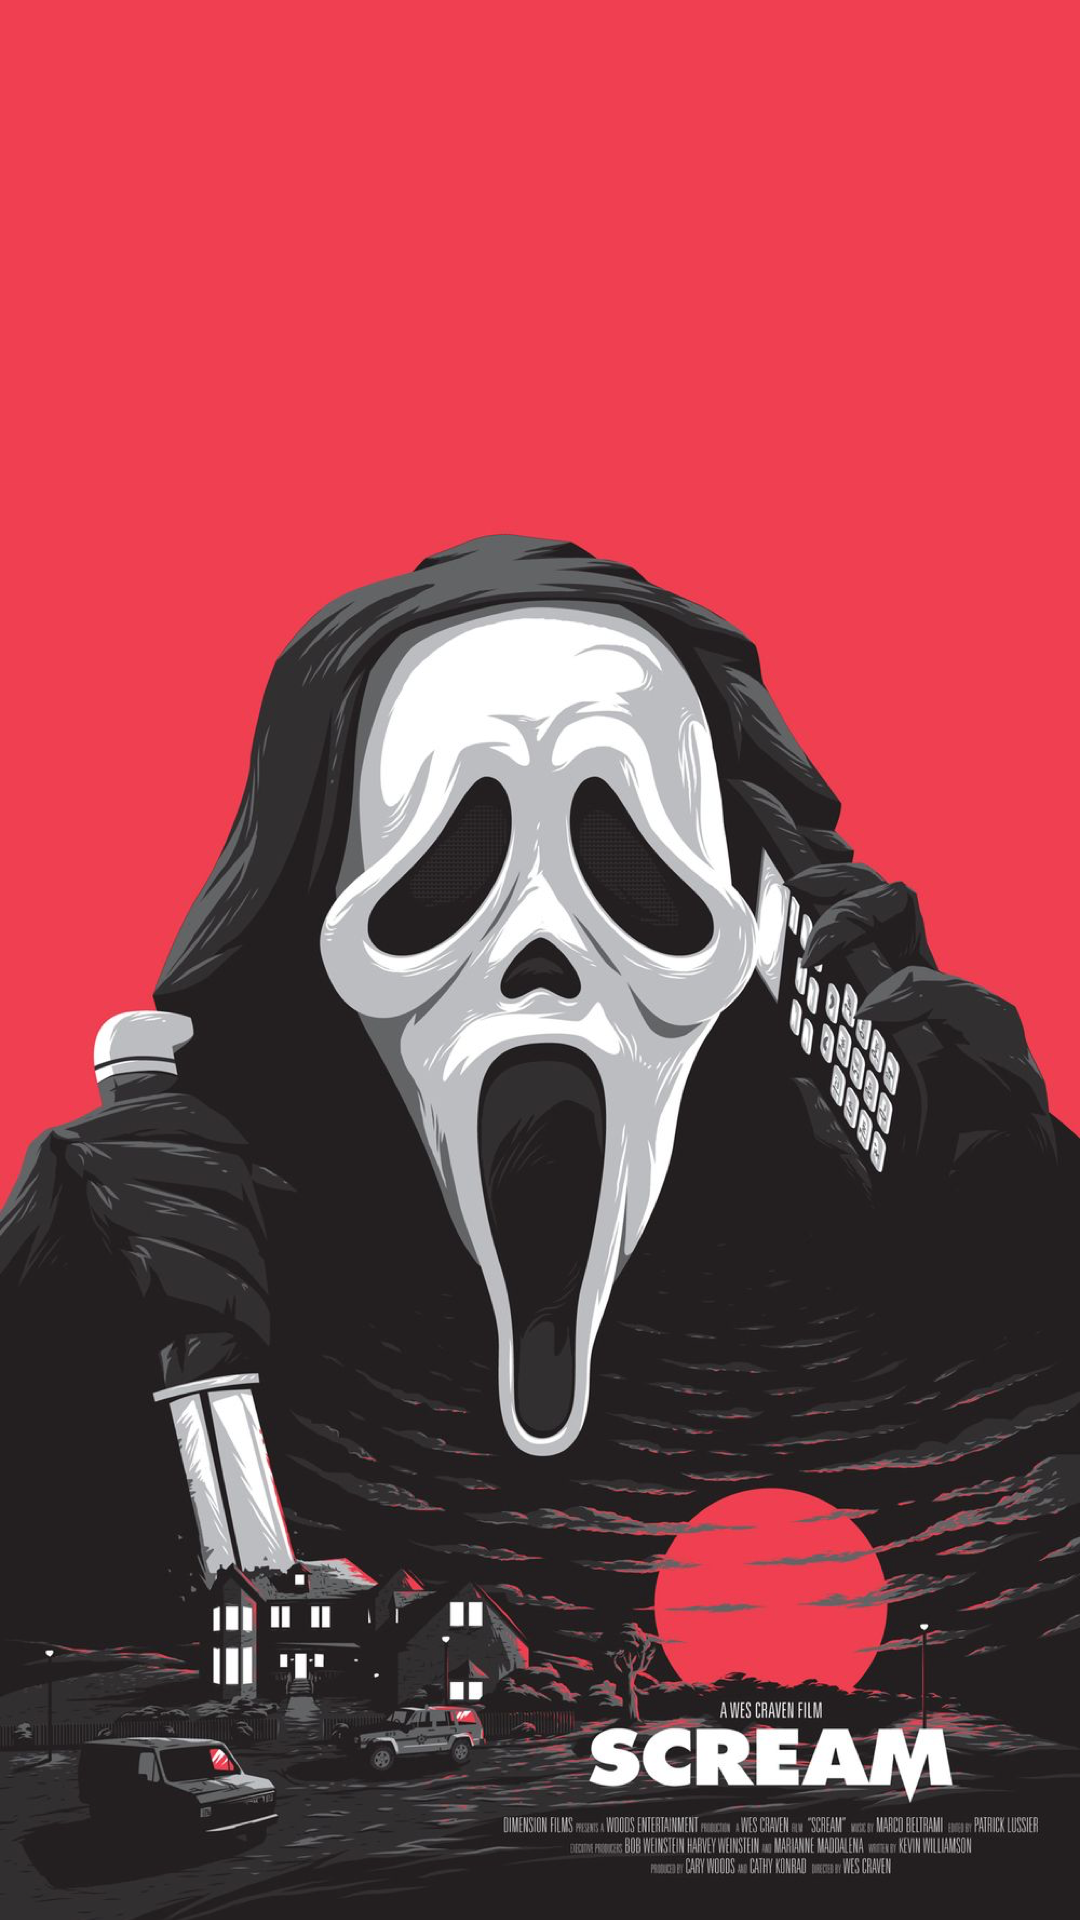 ghostface scream iphone wallpaper. Scary wallpaper, Scream movie poster, Scary movies